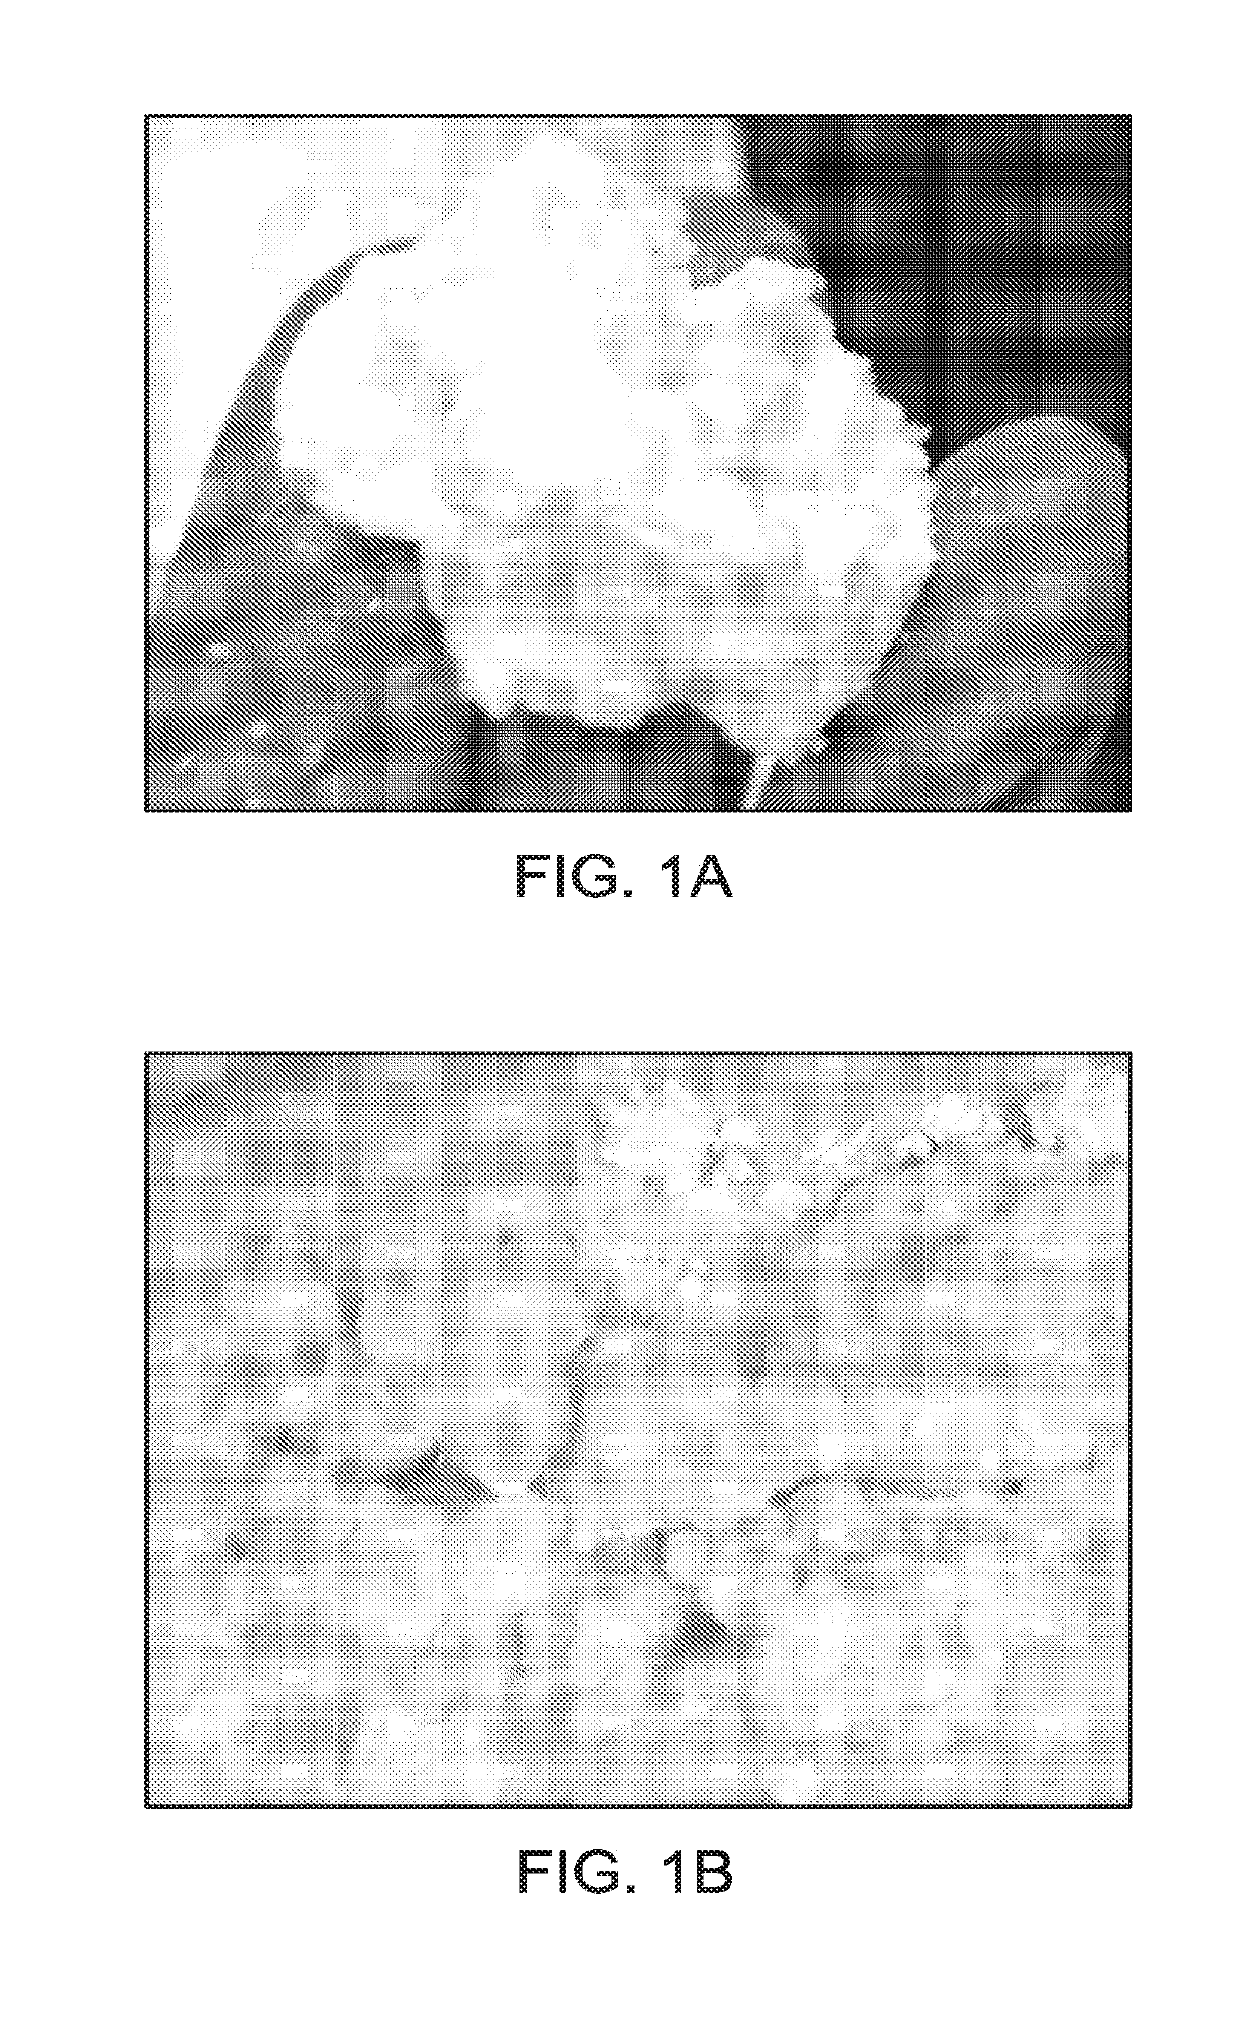 Nanosilica Dispersion for Thermally Insulating Packer Fluid